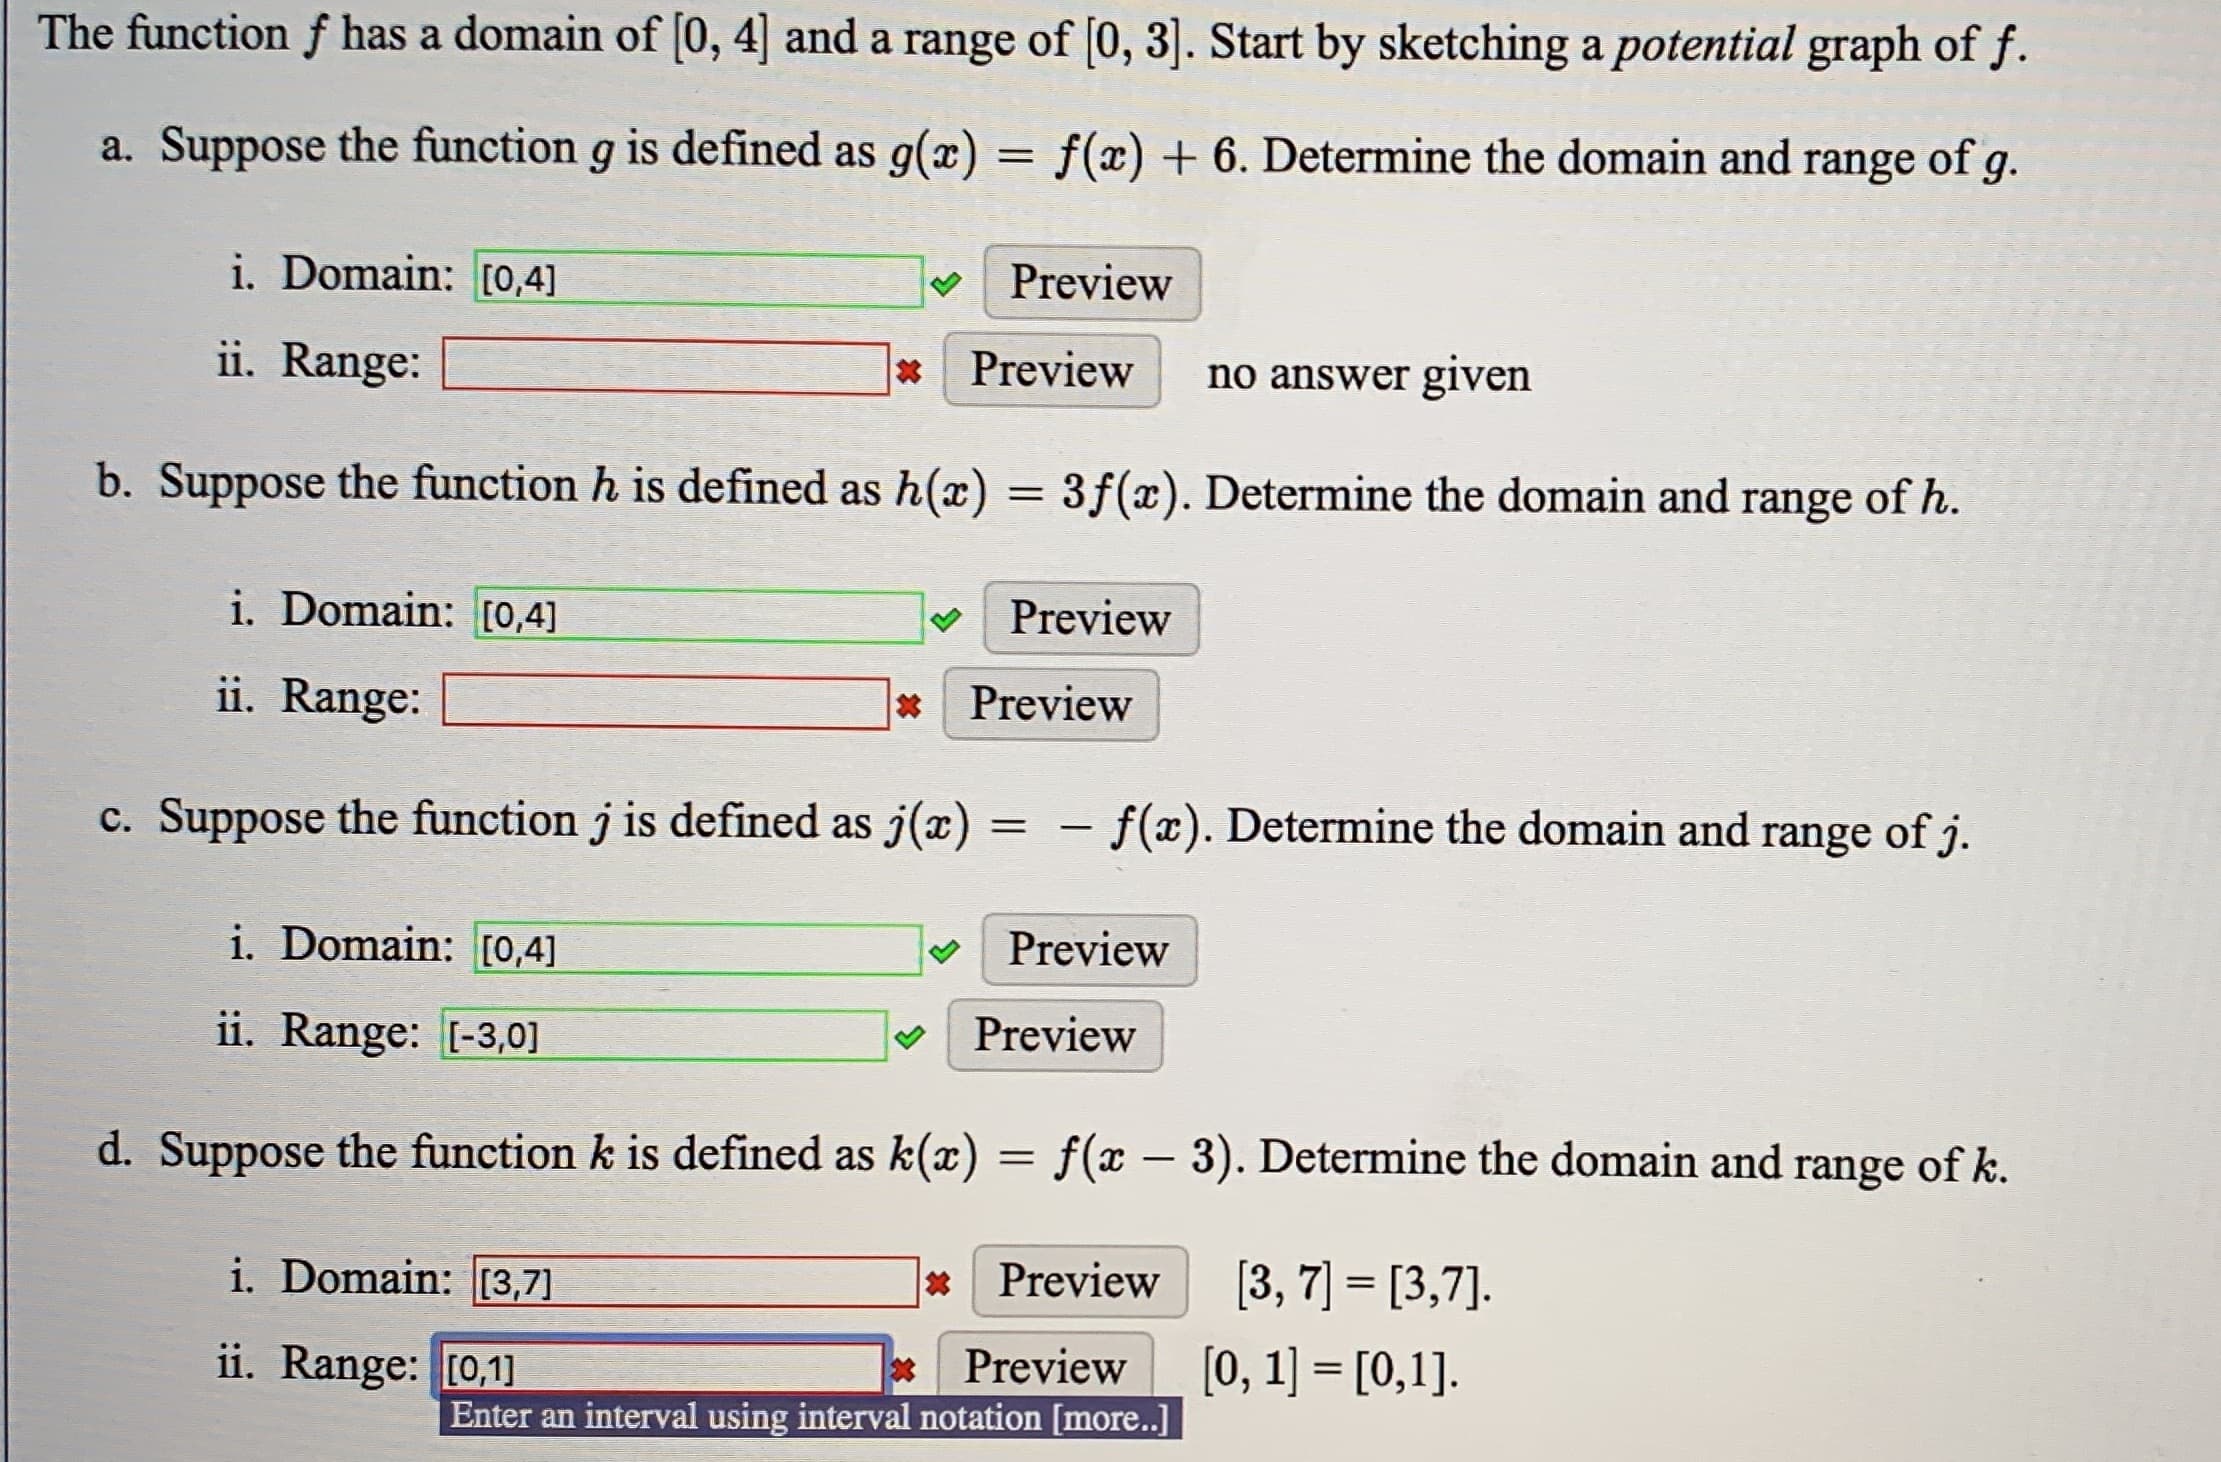 a. Suppose the function g is defined as g(x) = f(x) + 6. Determine the domain and range of g.
i. Domain: [0,4]
V Preview
ii. Range:
* Preview
no answer given
b. Suppose the function h is defined as h(x) = 3f(x). Determine the domain and range of h.
%3|
i. Domain: [0,4]
Preview
ii. Range:
*Preview
c. Suppose the function j is defined as j(x) = -
– f(x). Determine the domain and range of j.
i. Domain: [0,4]
Preview
ii. Range: [-3,0]
Preview
